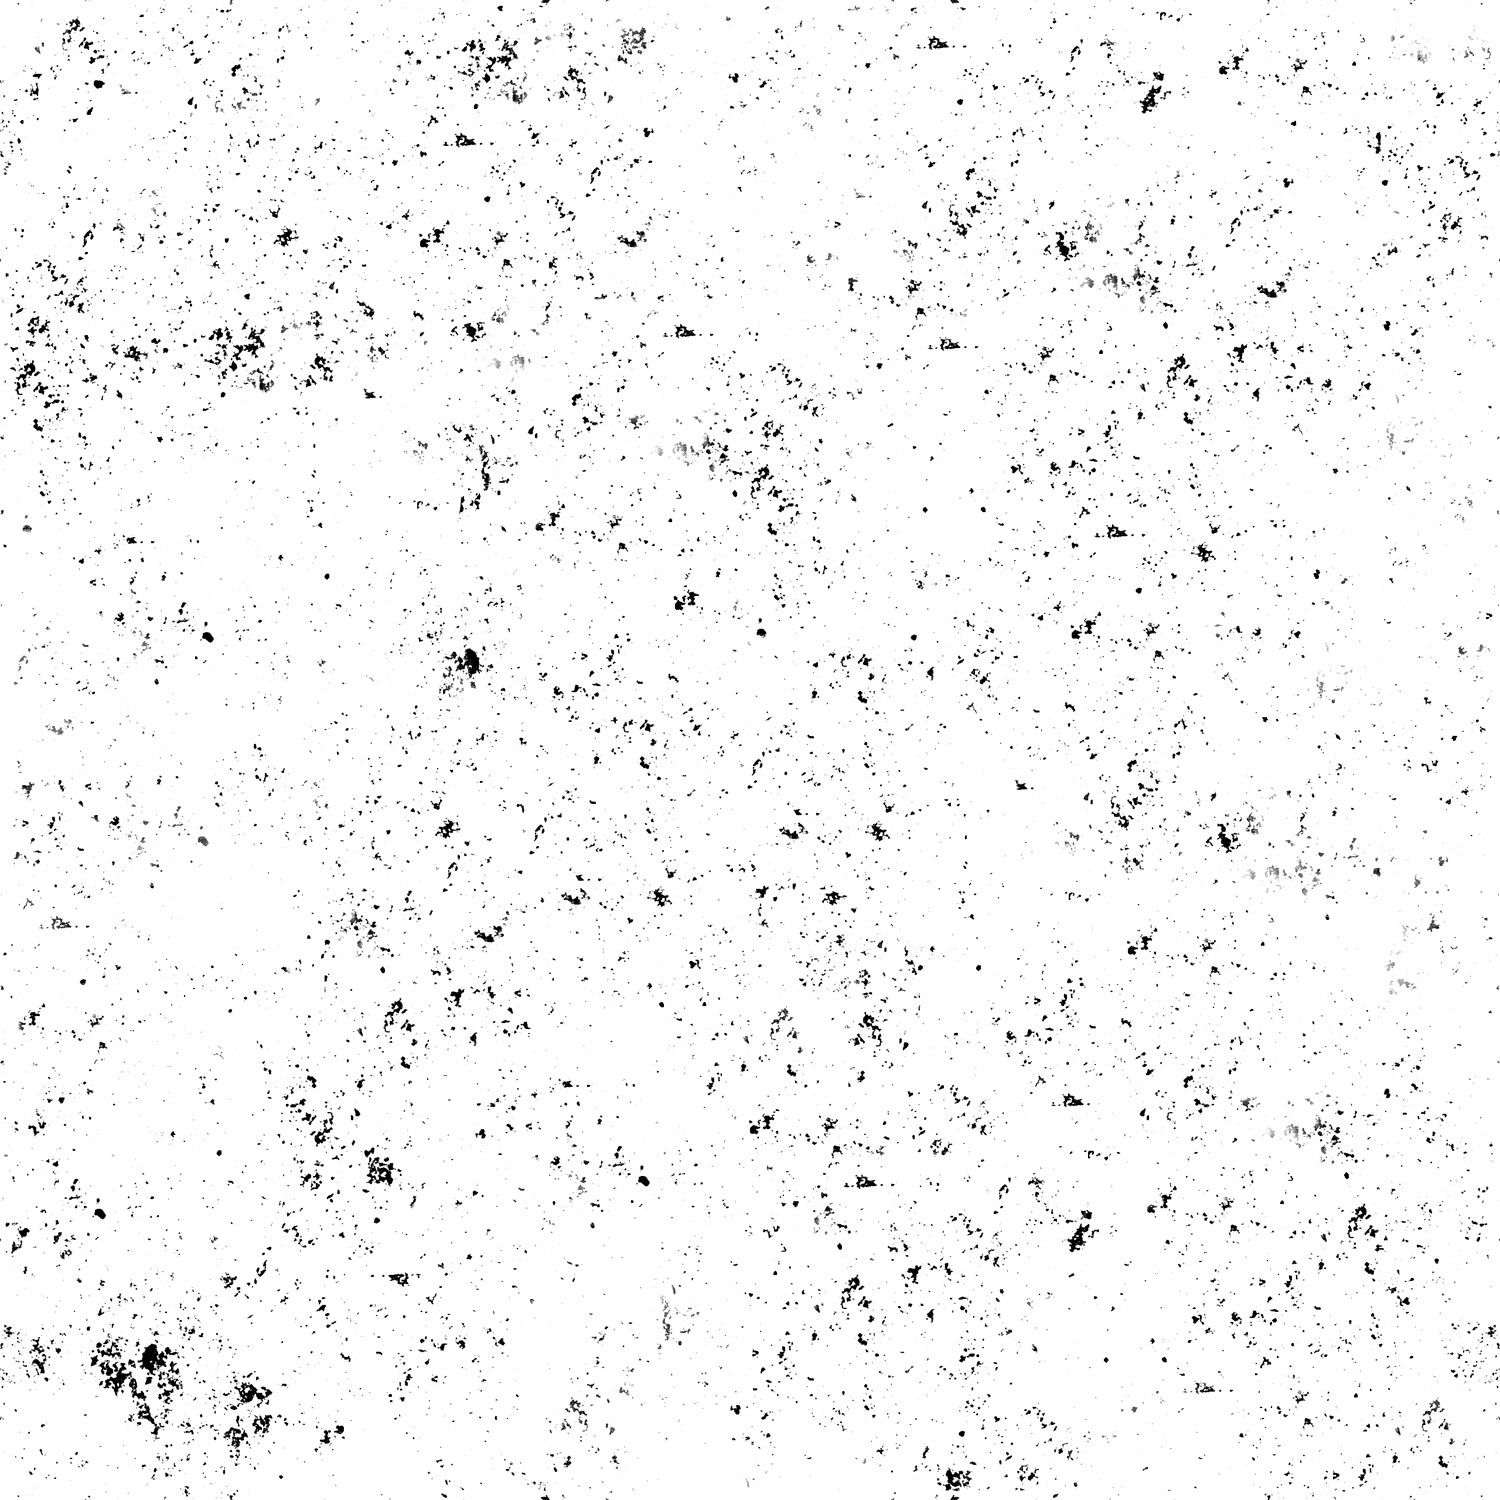 bjotto dirtmap random noise .search for bjotto to see more dirtmaps royalty free